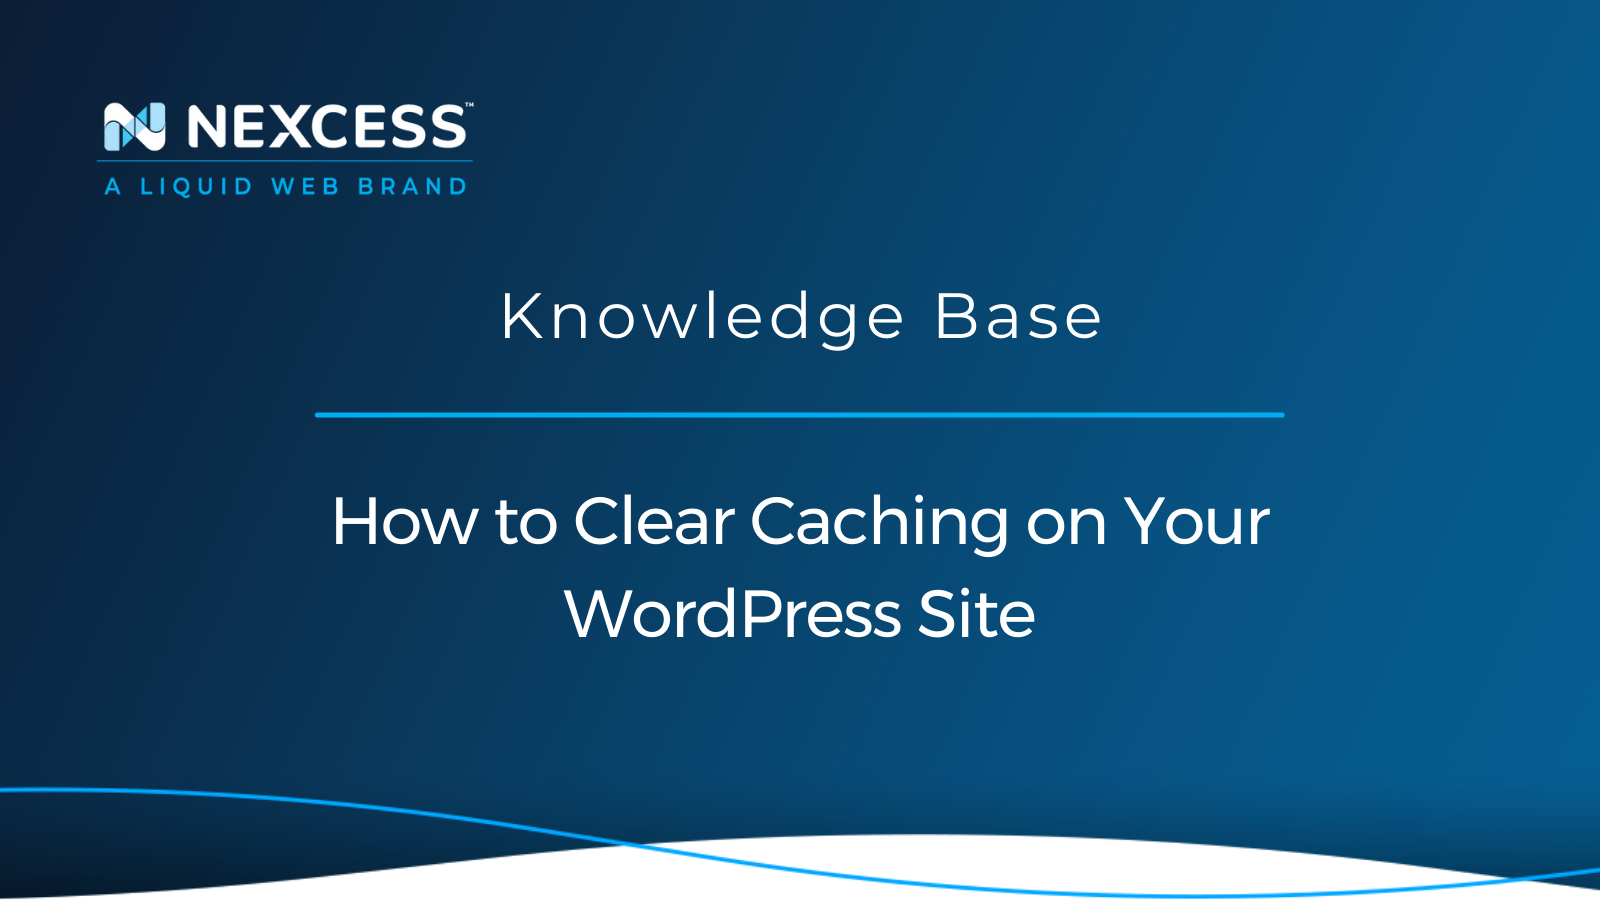 How to Clear Caching on Your WordPress Site